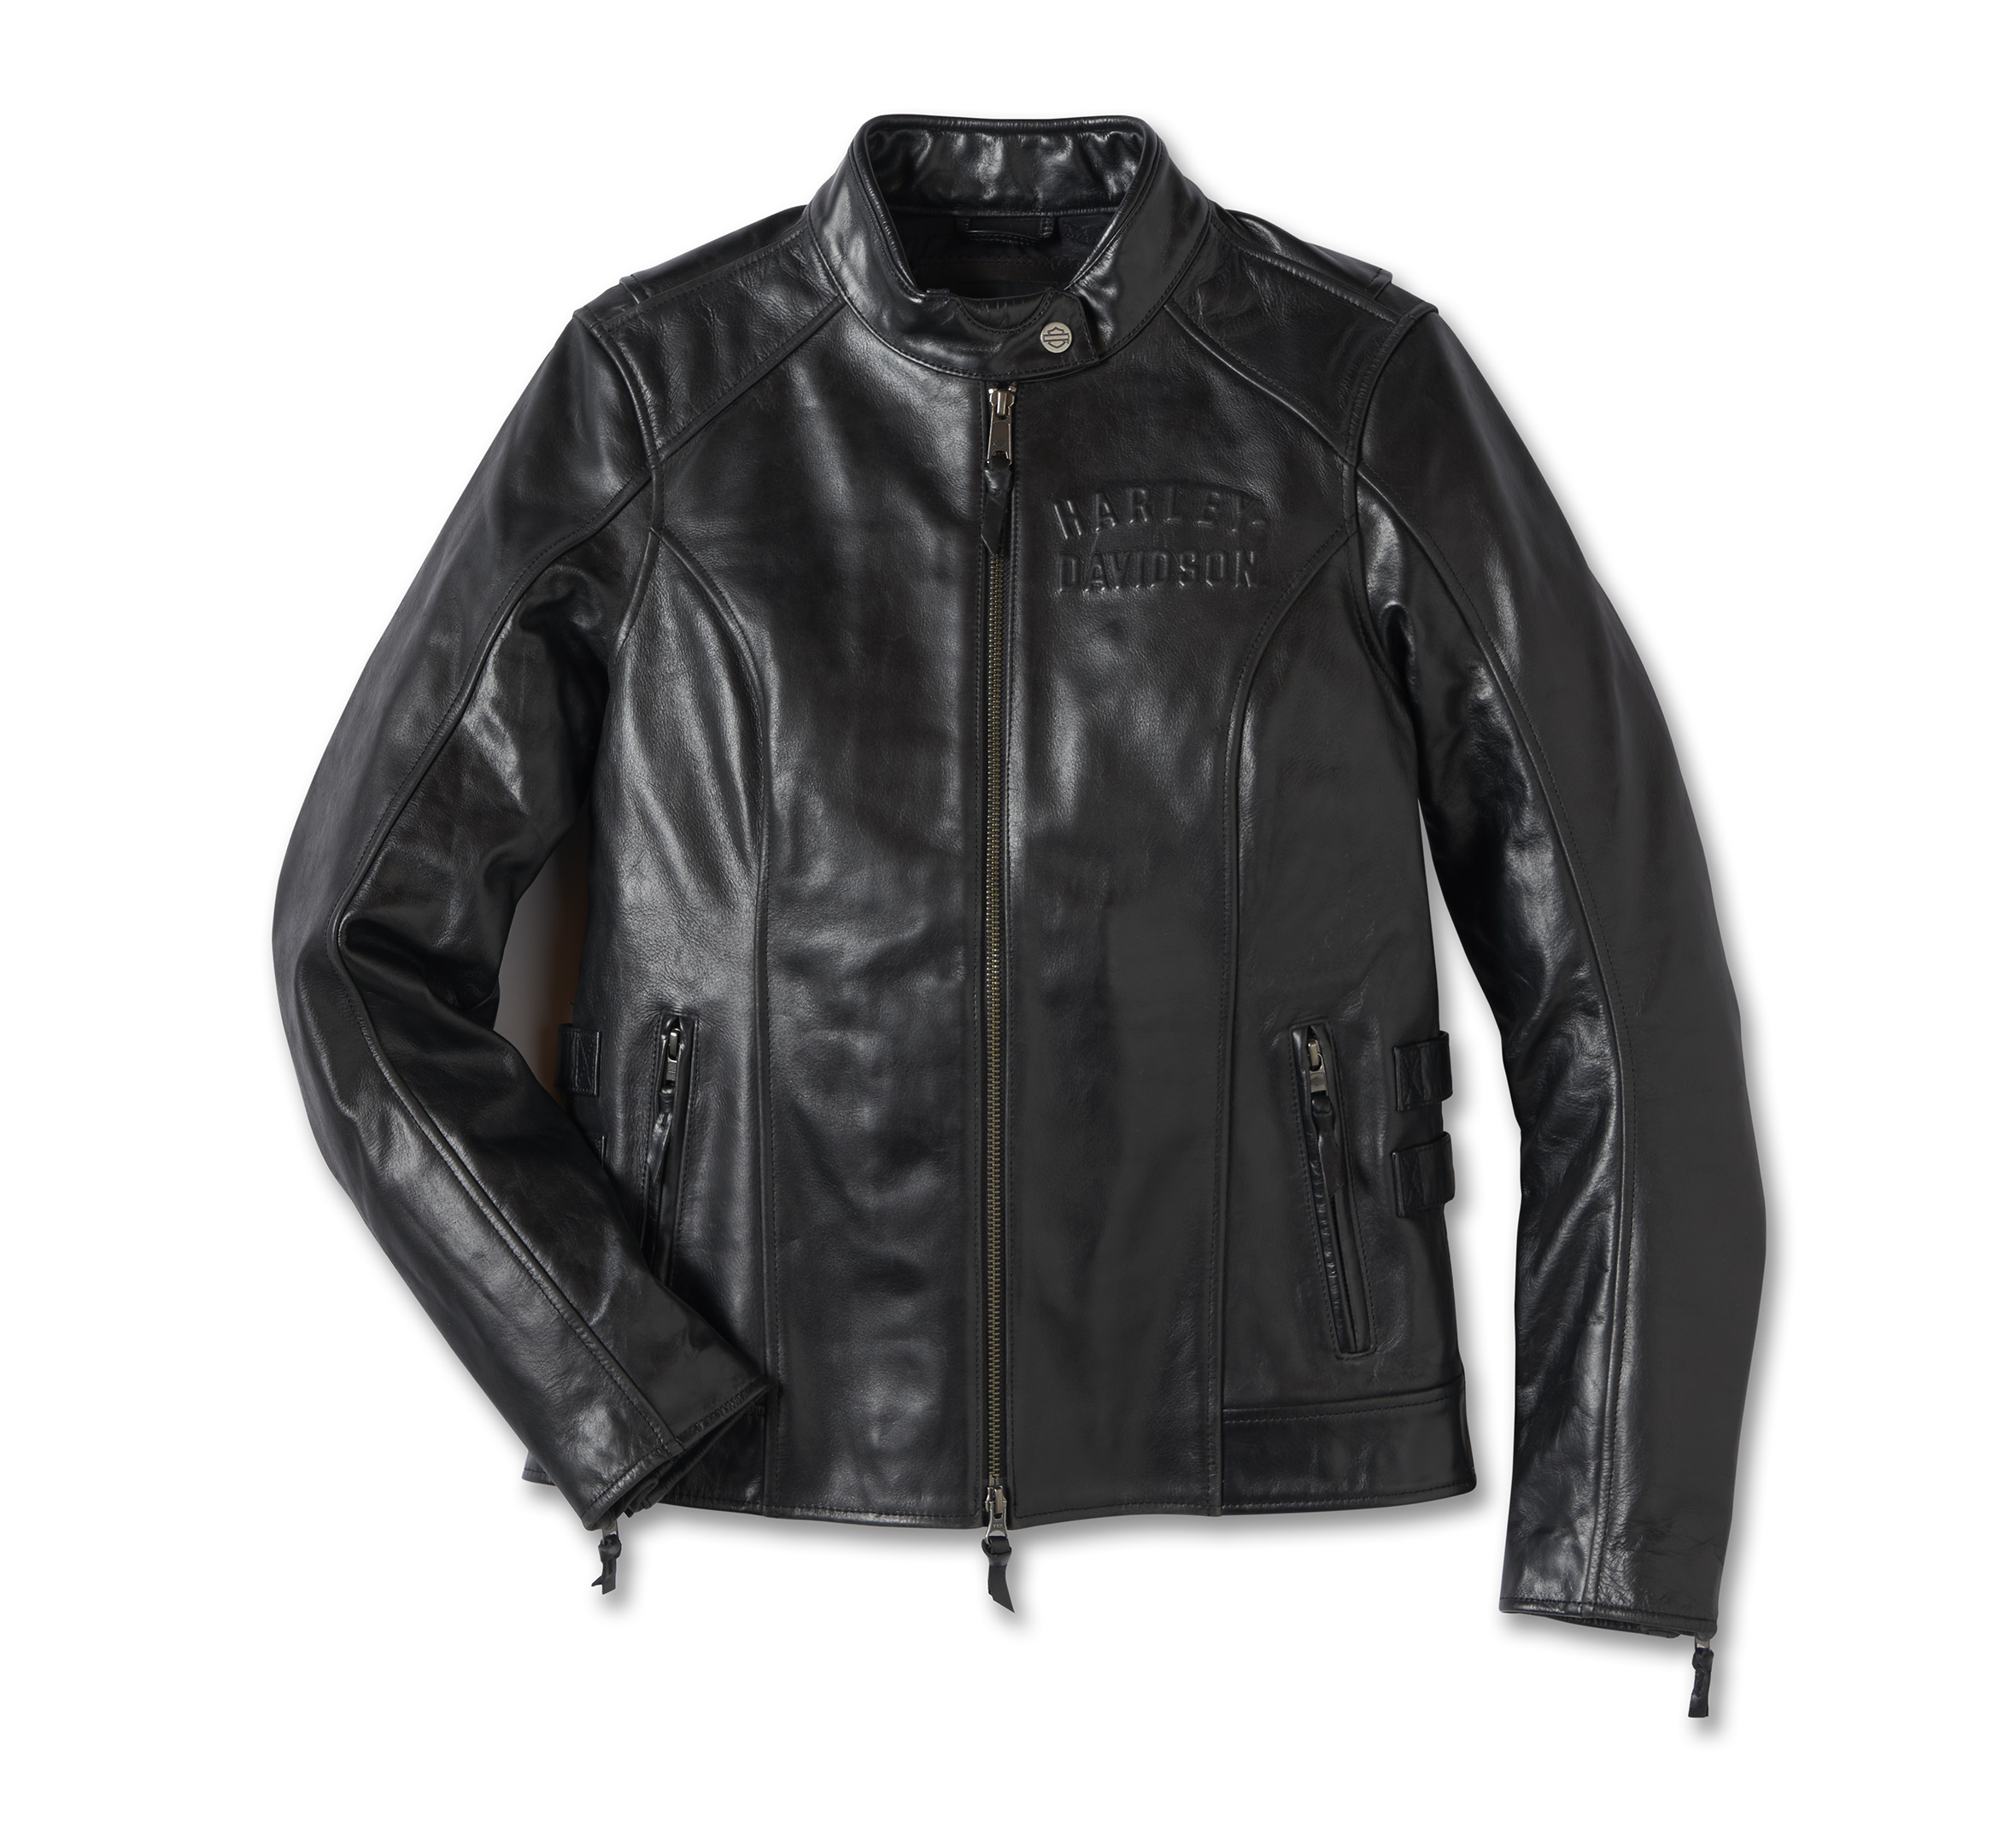 Shop Now: Women's White Leather Motorcycle Cafe Racer Jacket In Europe